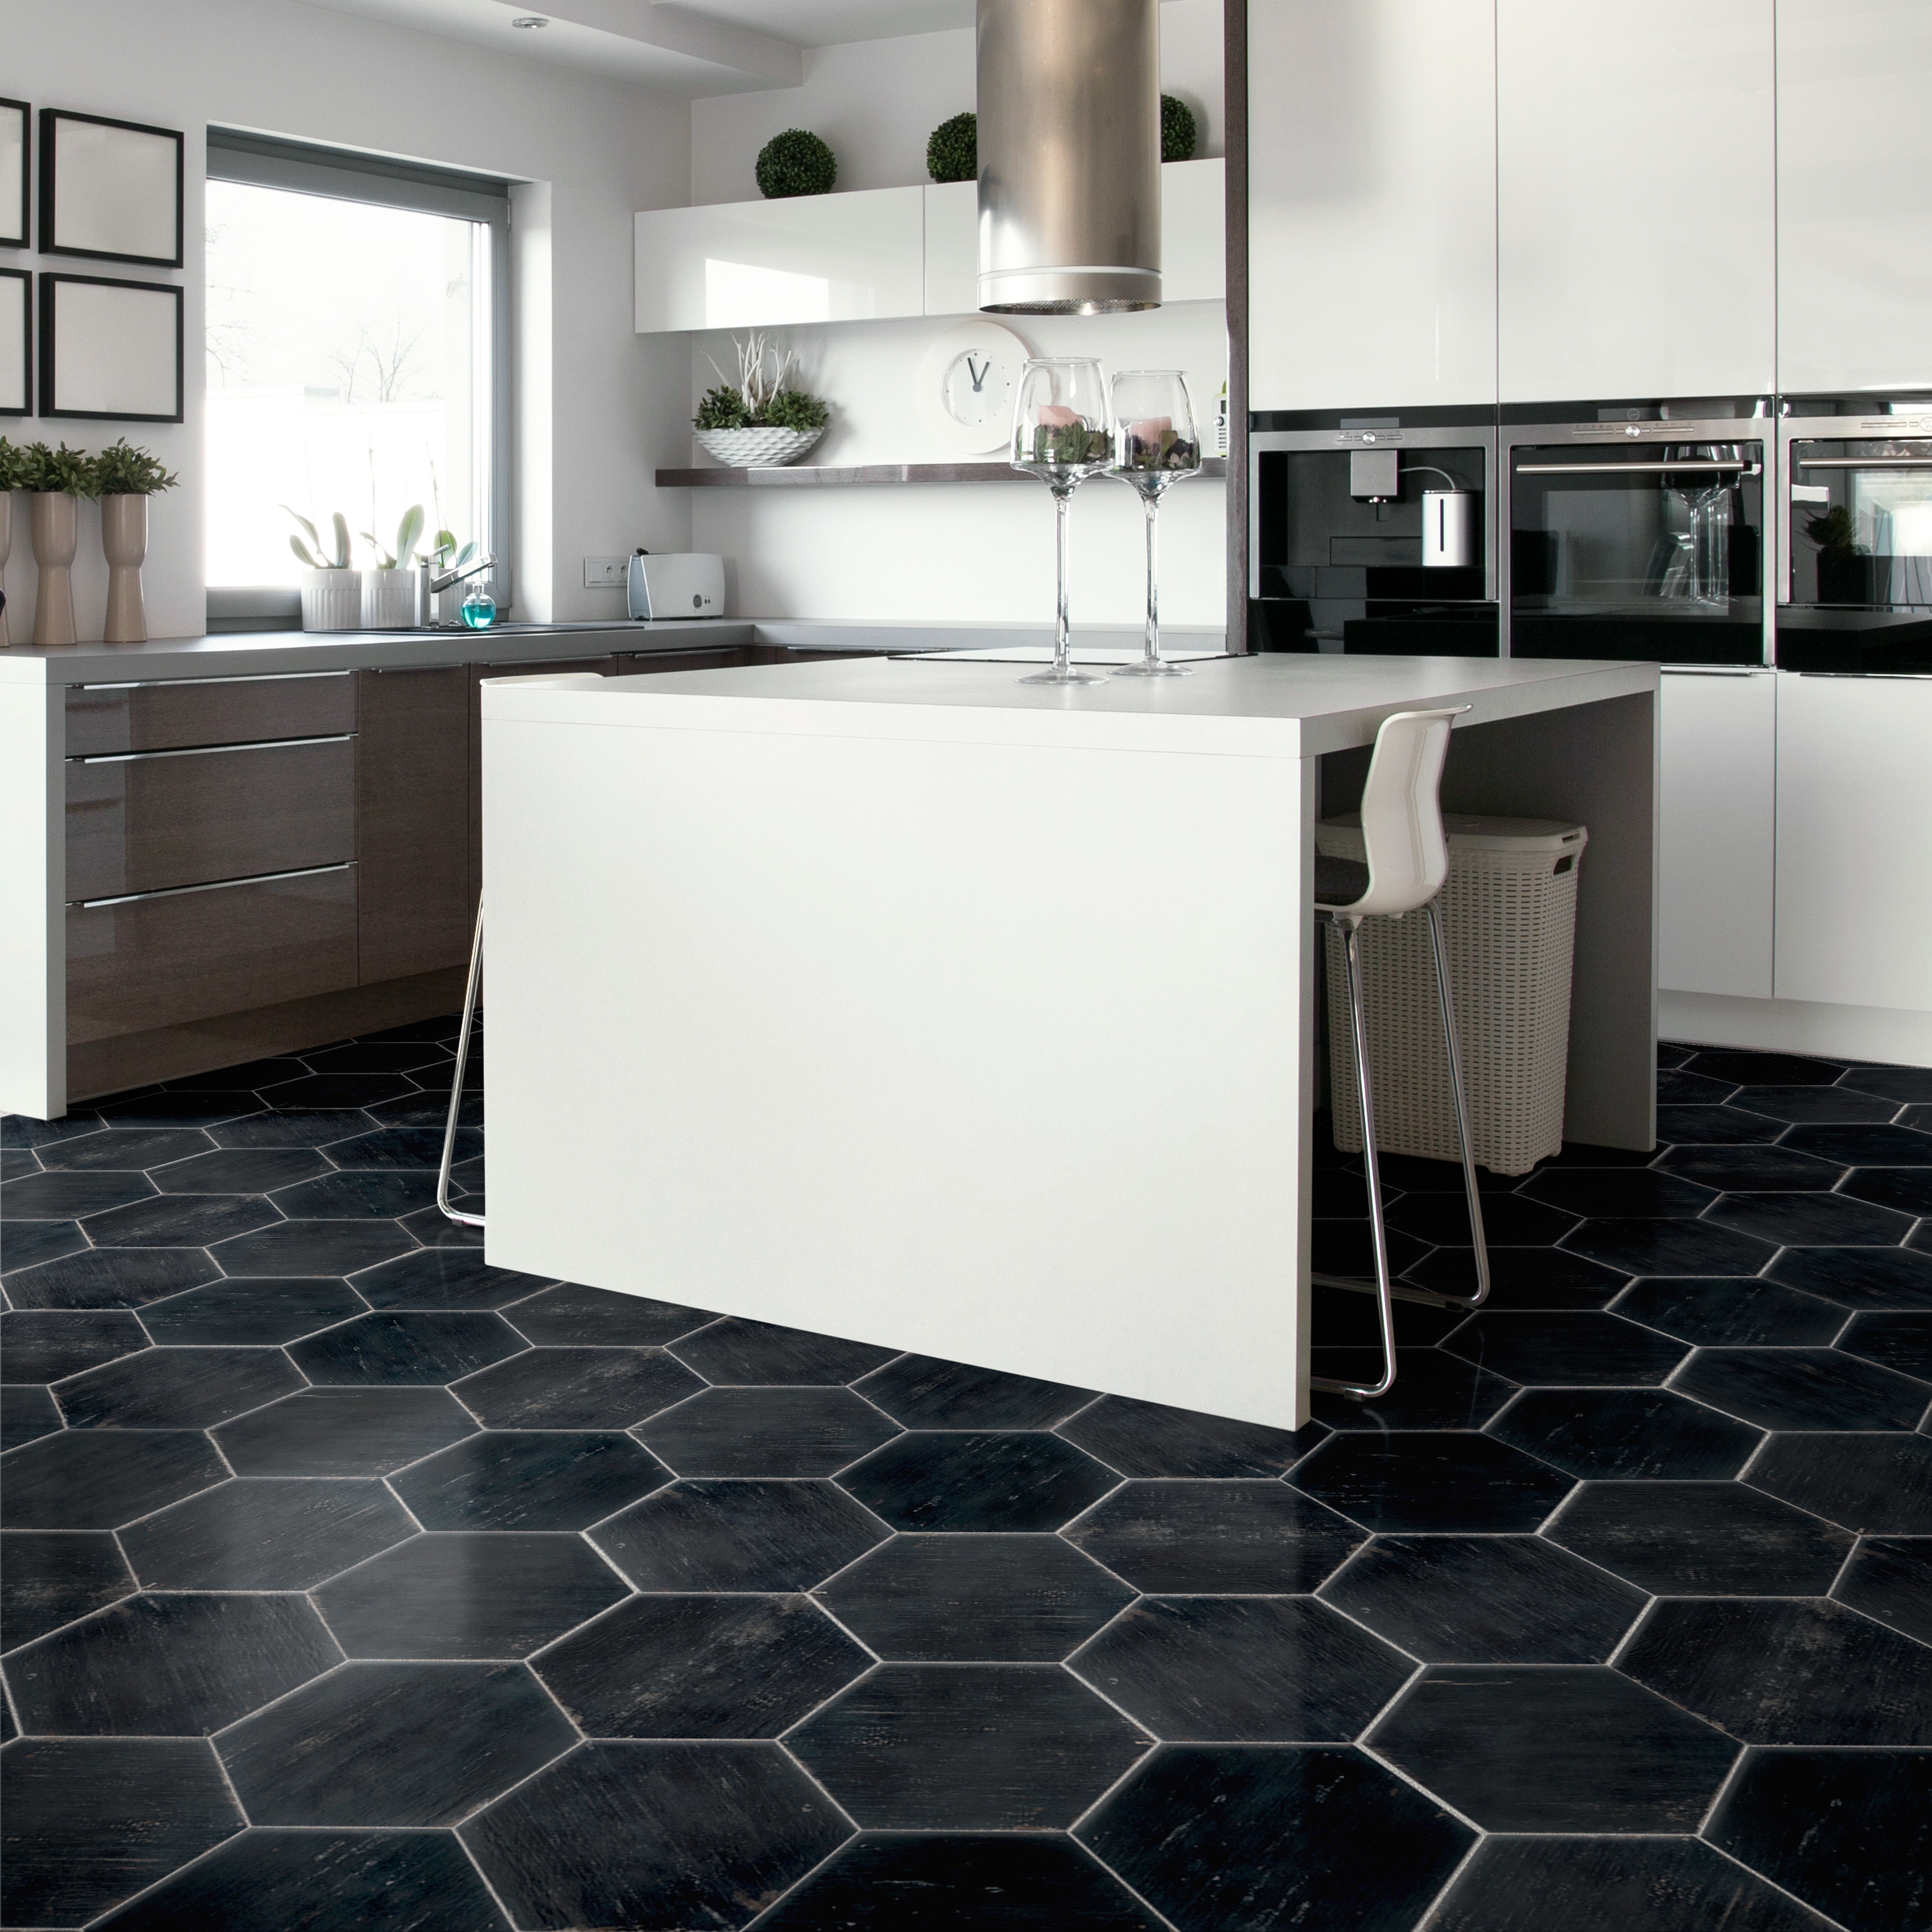 https://ak1.ostkcdn.com/images/products/is/images/direct/c755890ee5b22eabefb536fcf51d205147ffd503/Merola-Tile-Retro-Hex-Nero-14.13%22-x-16.25%22-Porcelain-Floor-and-Wall-Tile.jpg